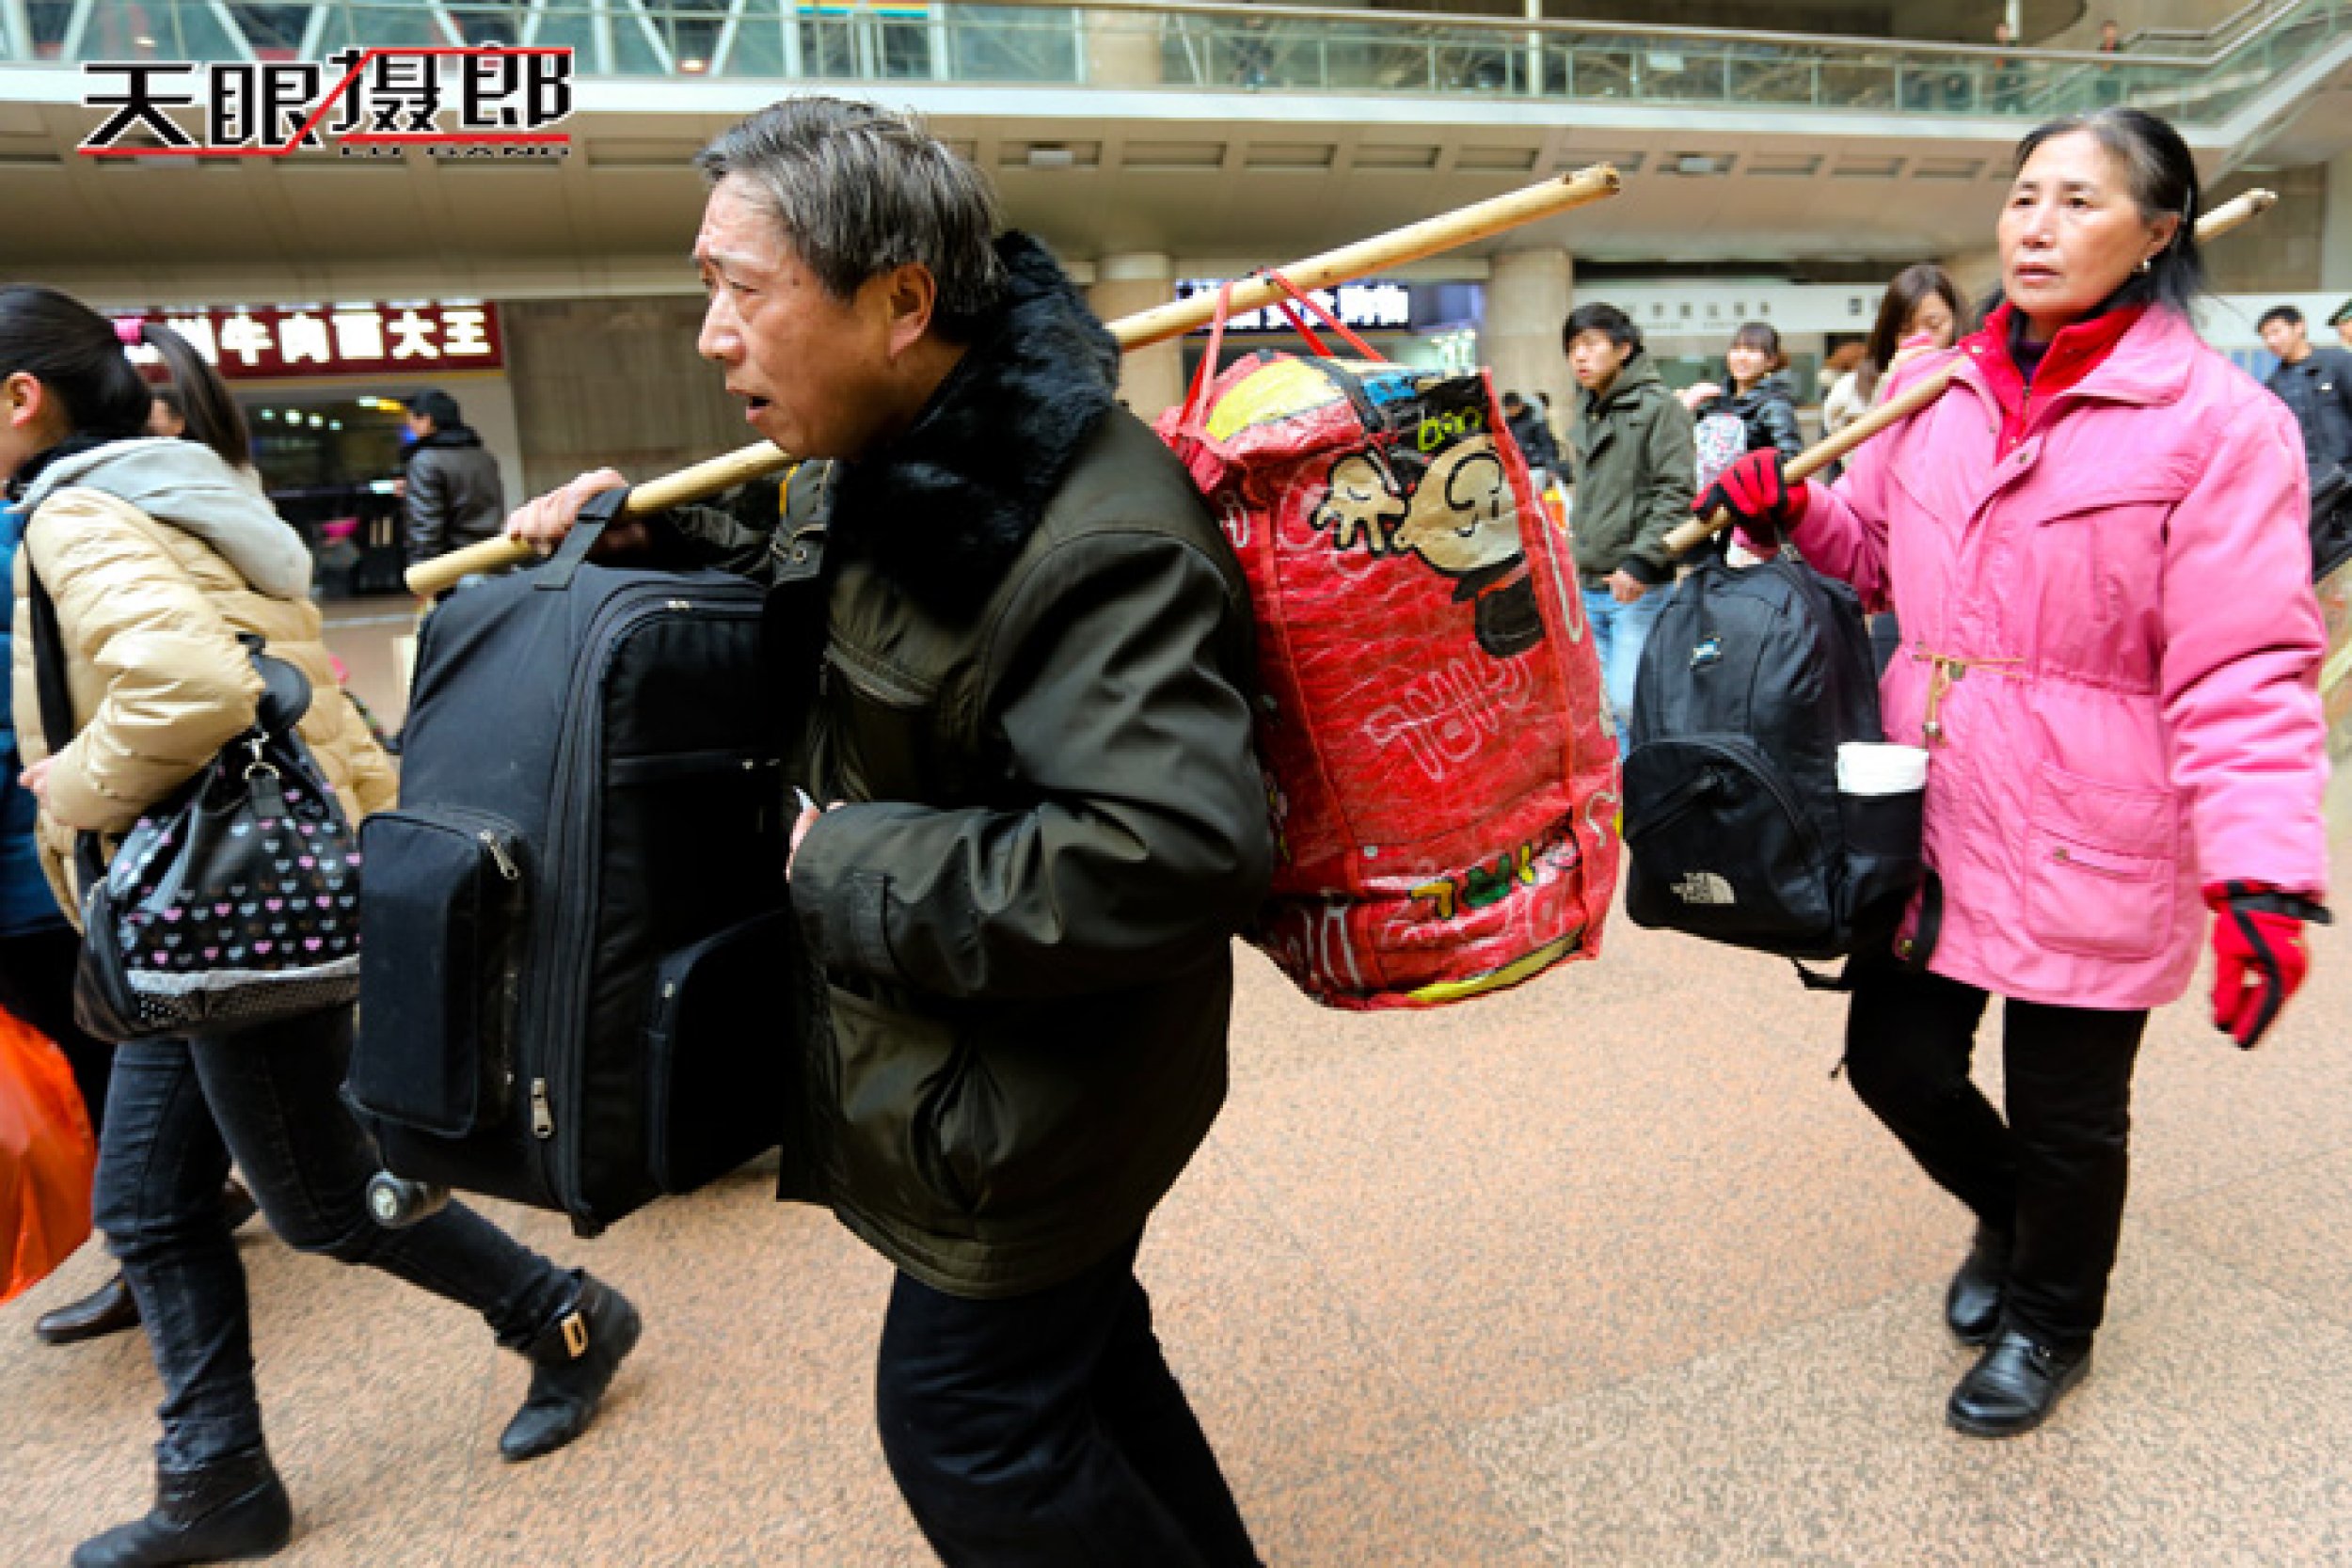 Travelers carry large bags